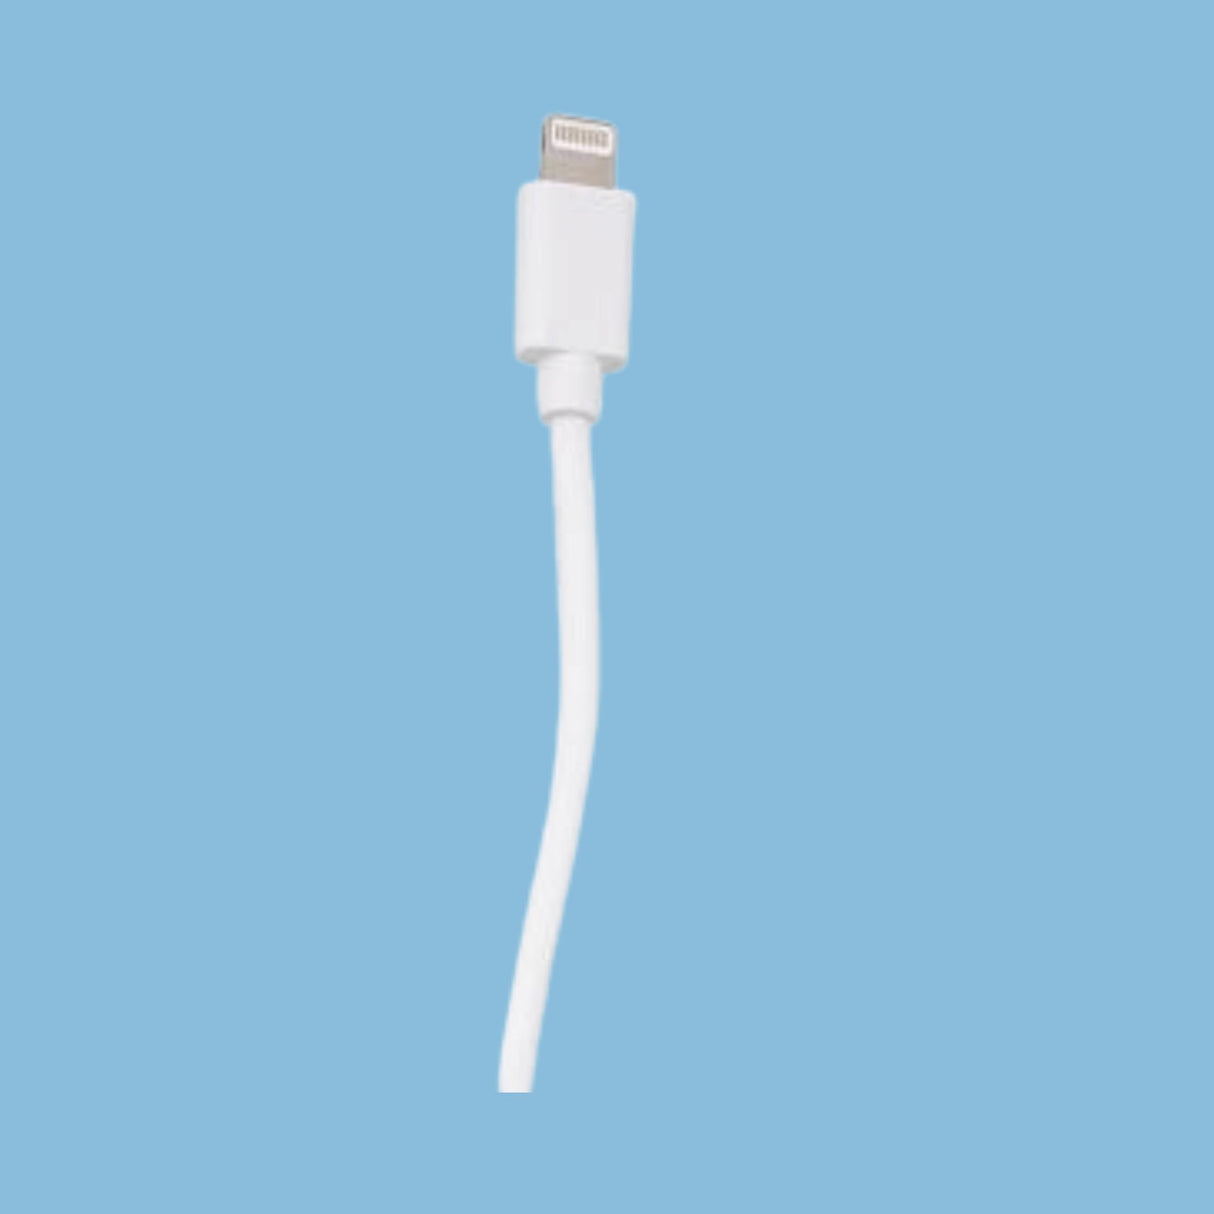 Geepas Lightning USB iPhone Cable GC1961 - White - KWT Tech Mart